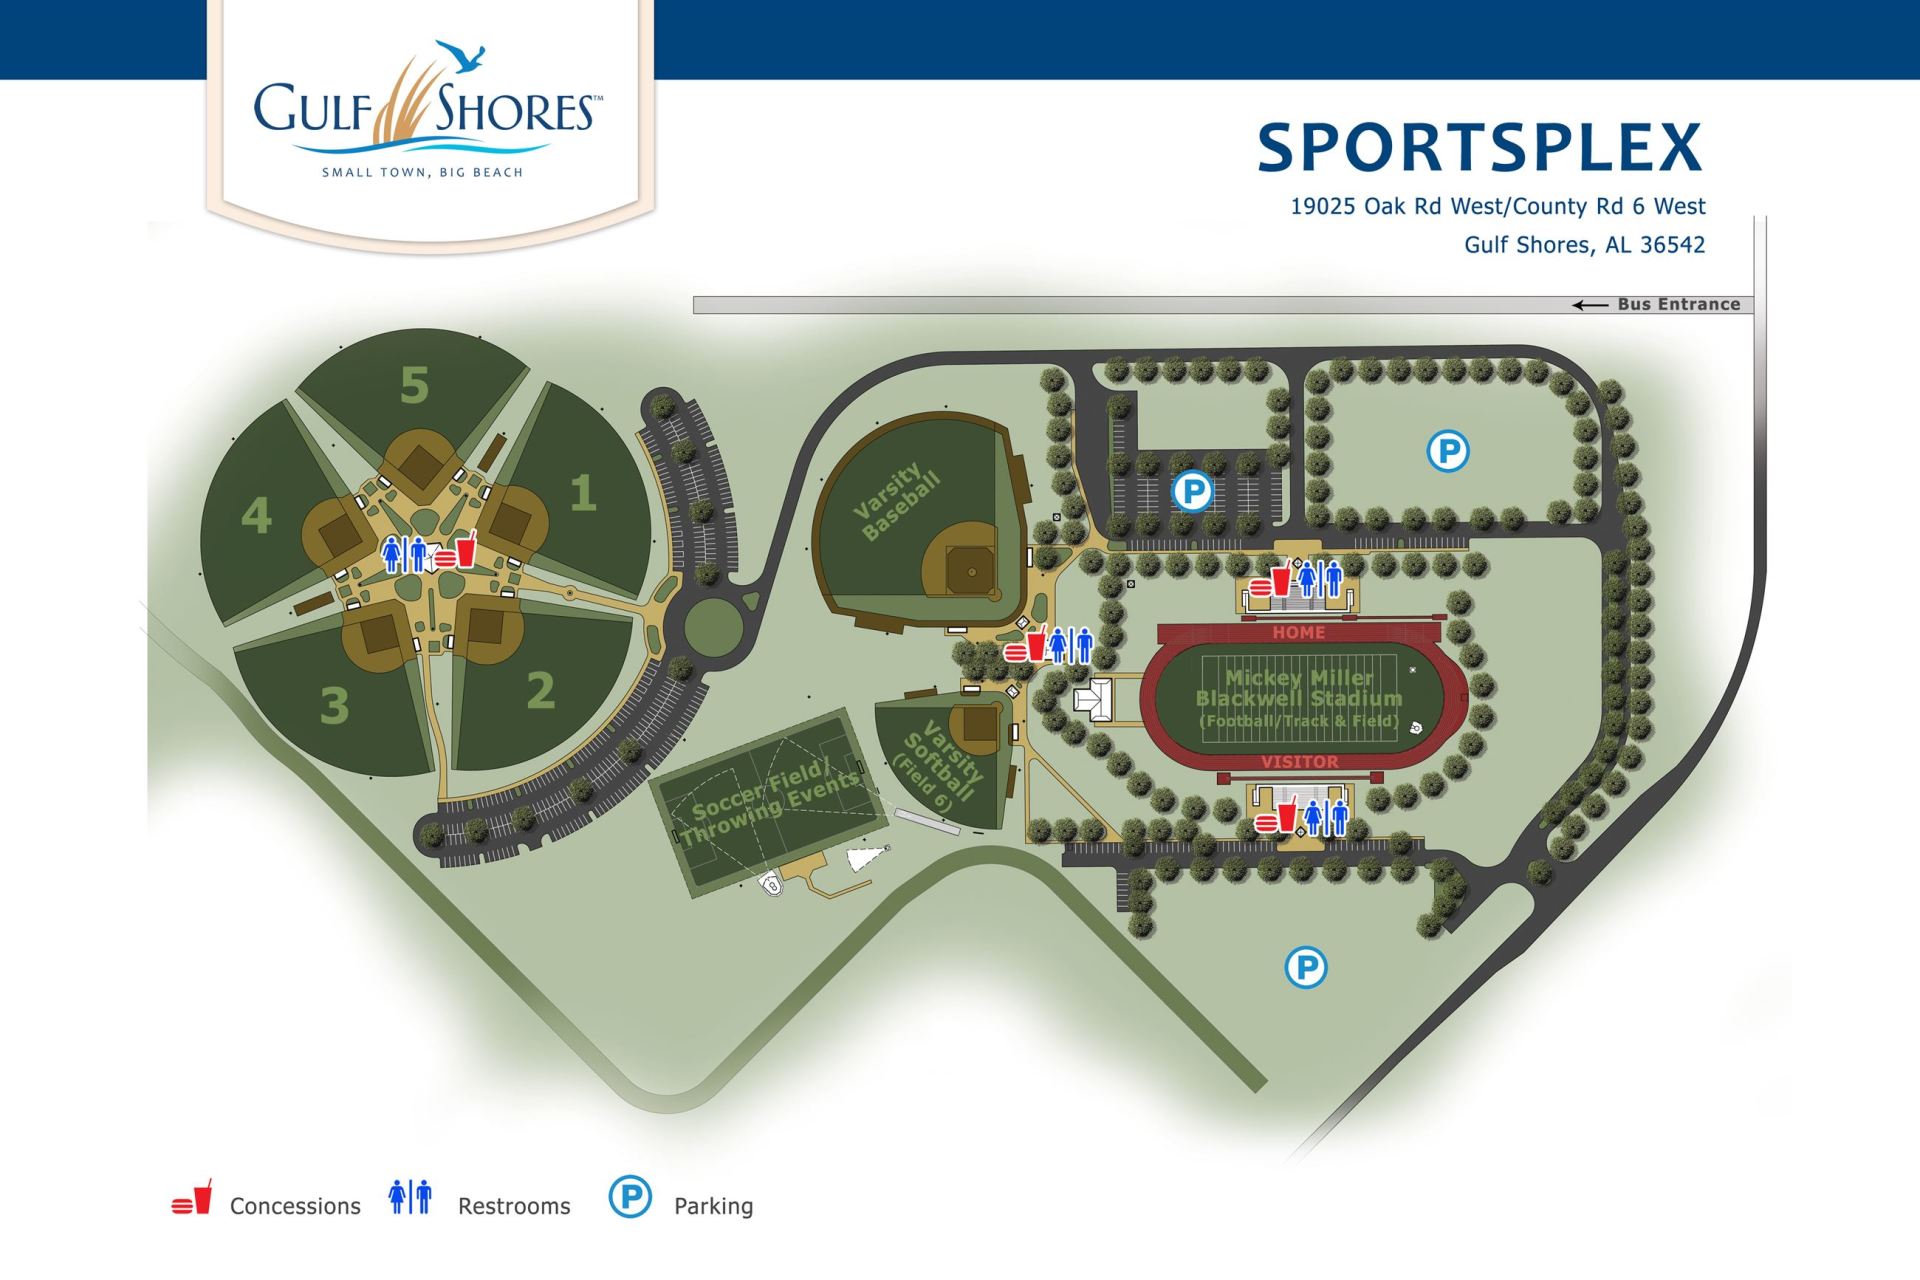 Gulf Shores is looking to build a 38,000 square foot multi-purpose building at its Sportsplex.